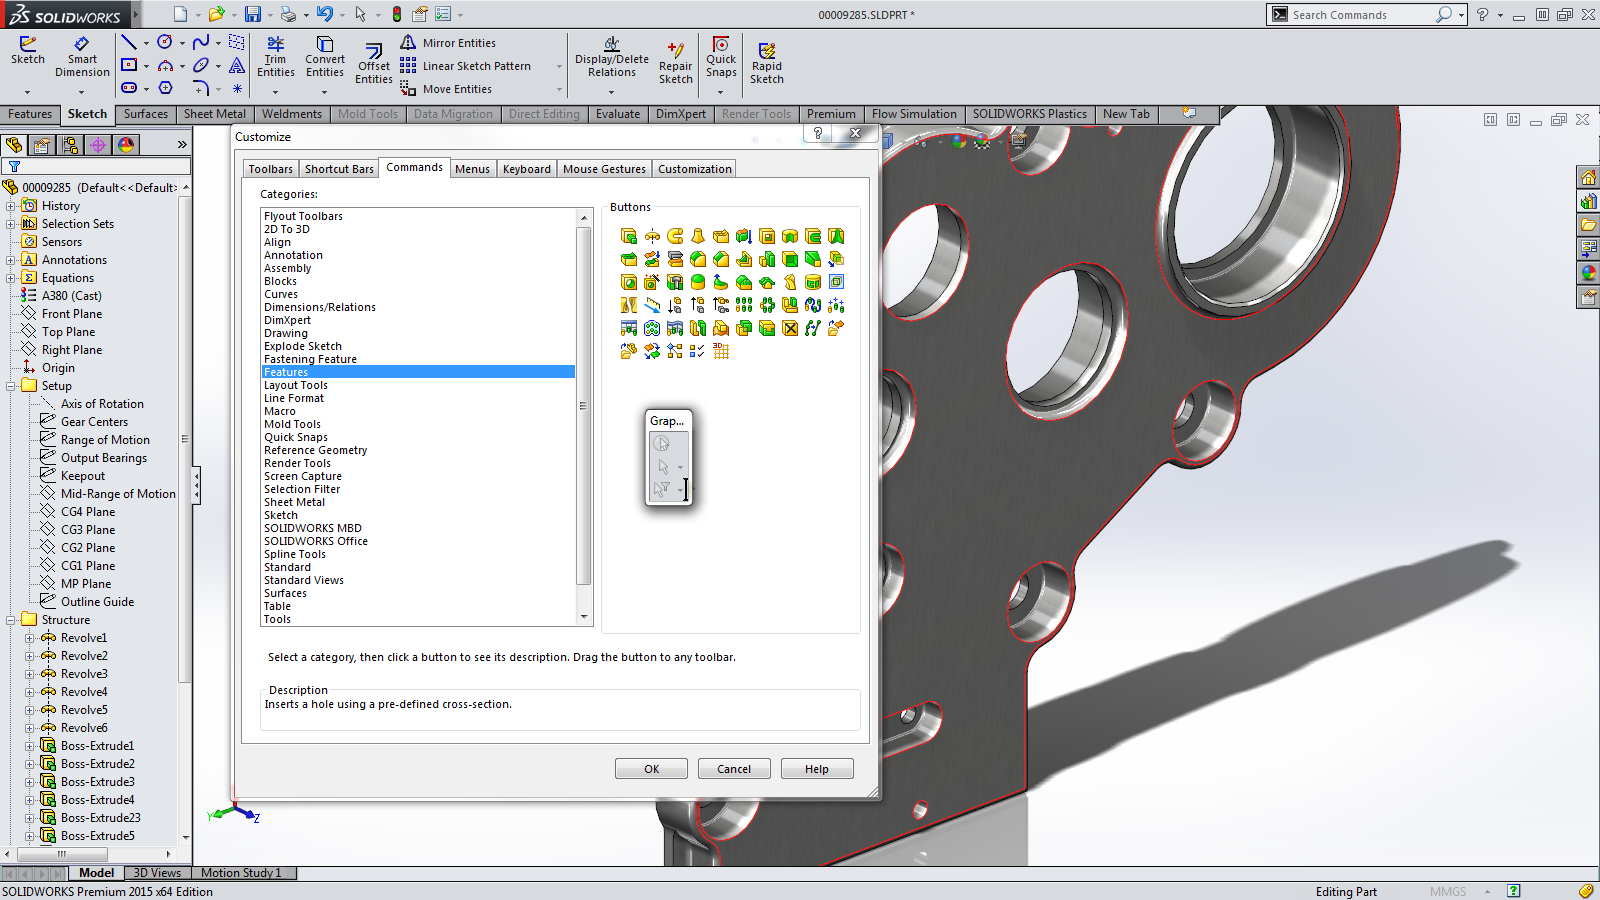 Sneak Peek: 15 Features coming in SOLIDWORKS 2015 – Customize Context-Sensitive Toolbars